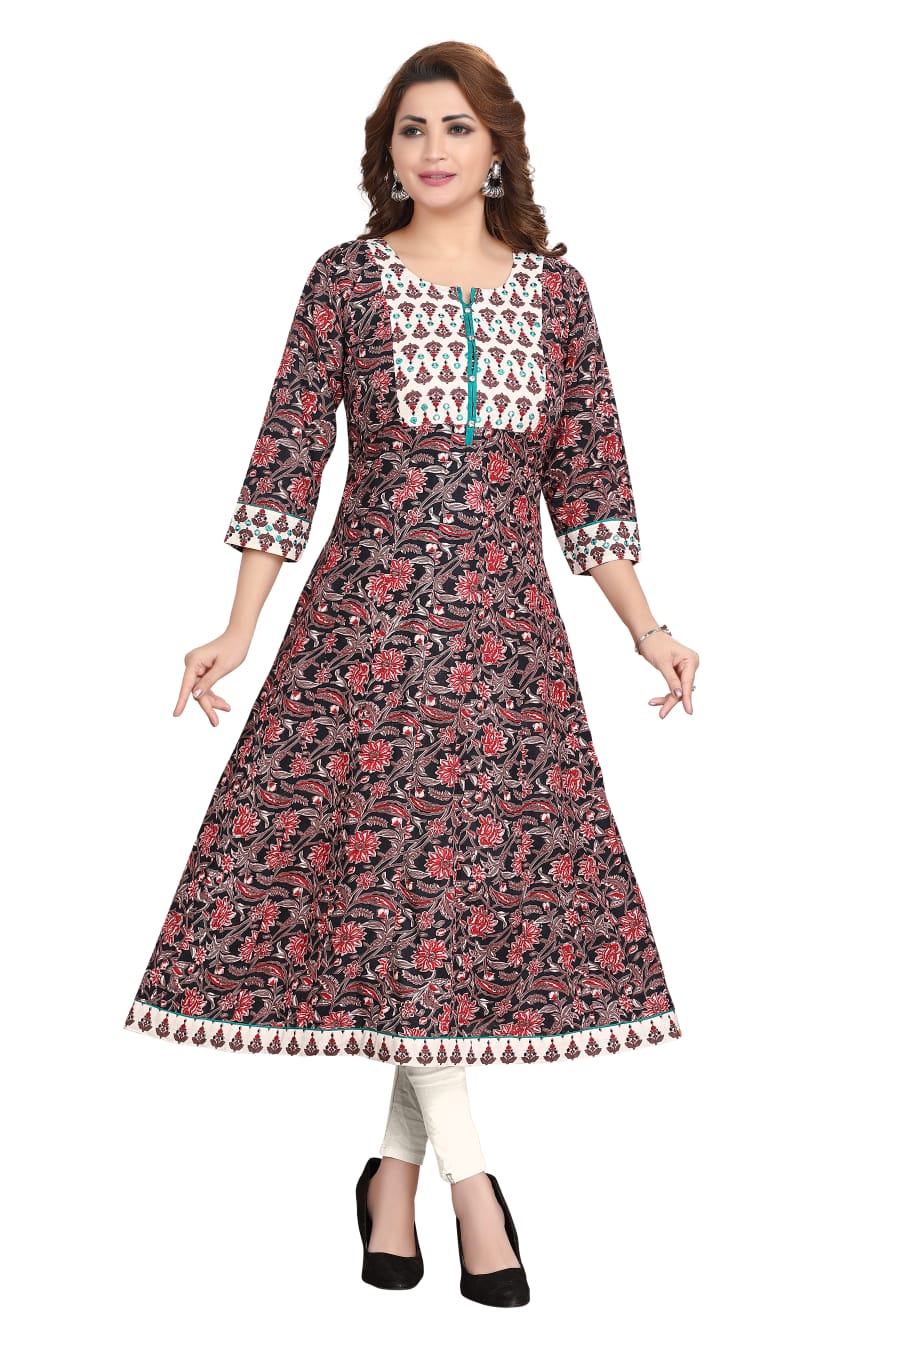 Cotton kalamkari body frock with mirror work and stone buttons